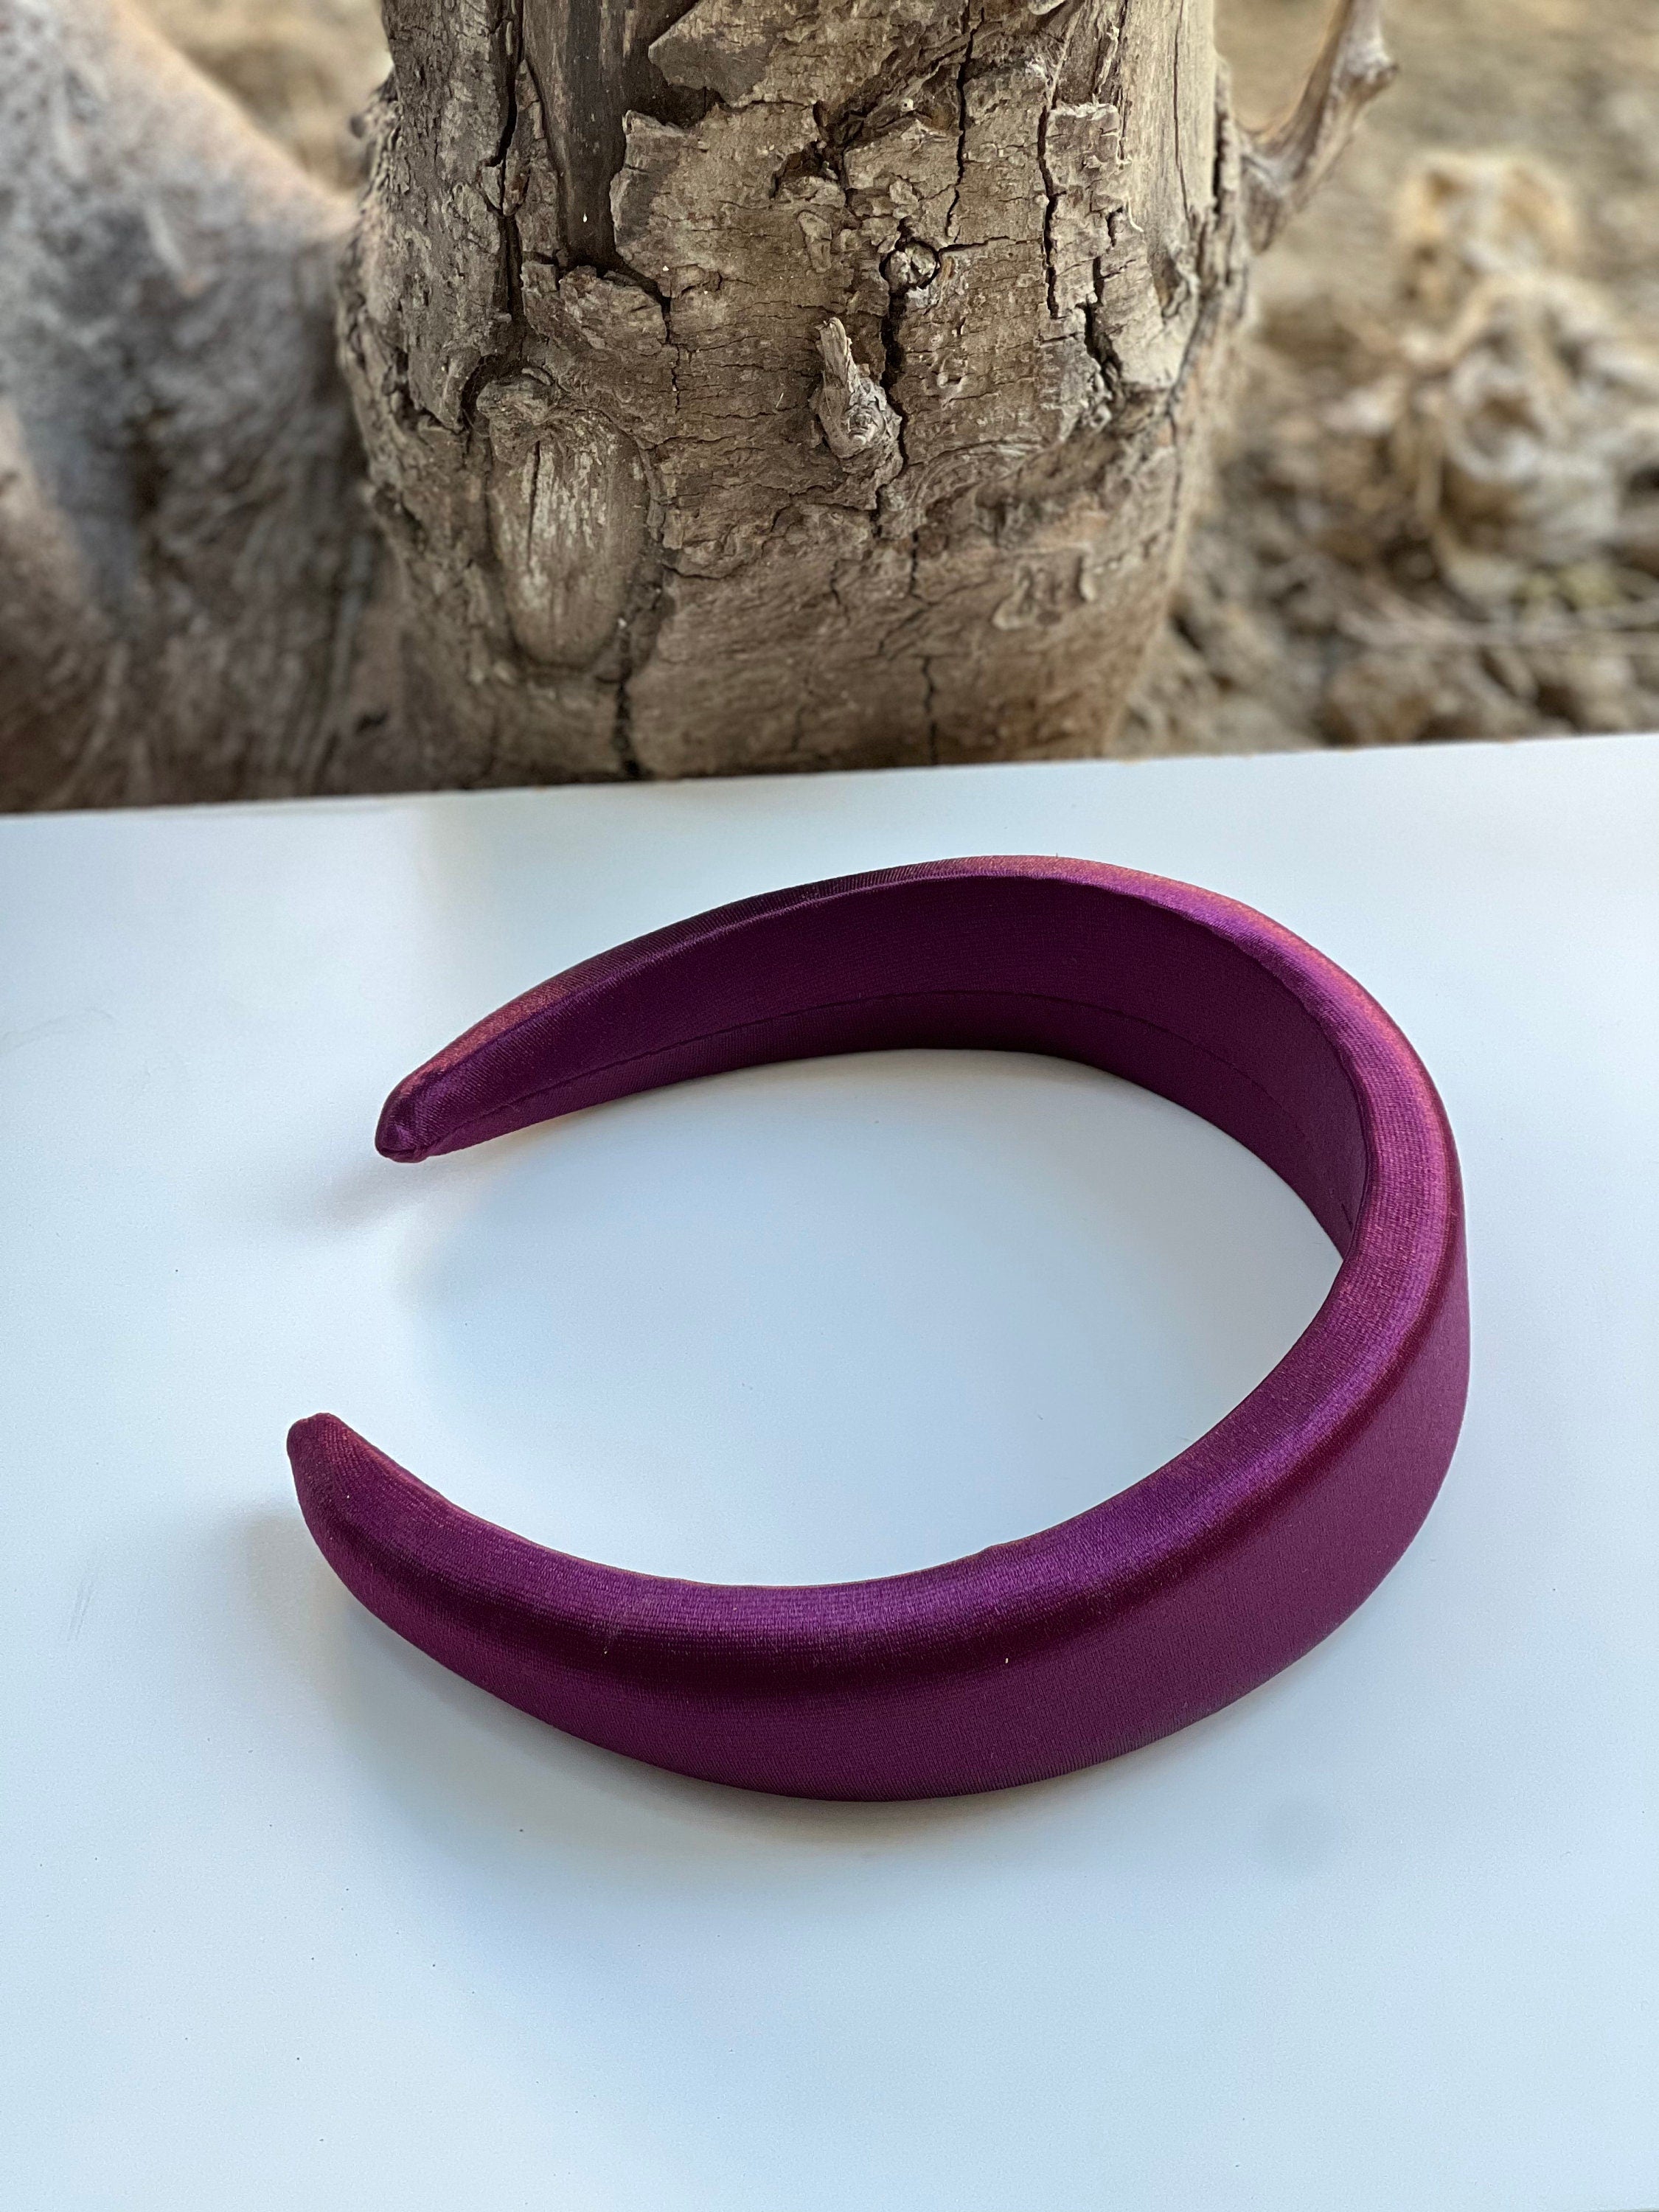 Dark cherry-colored headband with padded comfort for all-day wear.